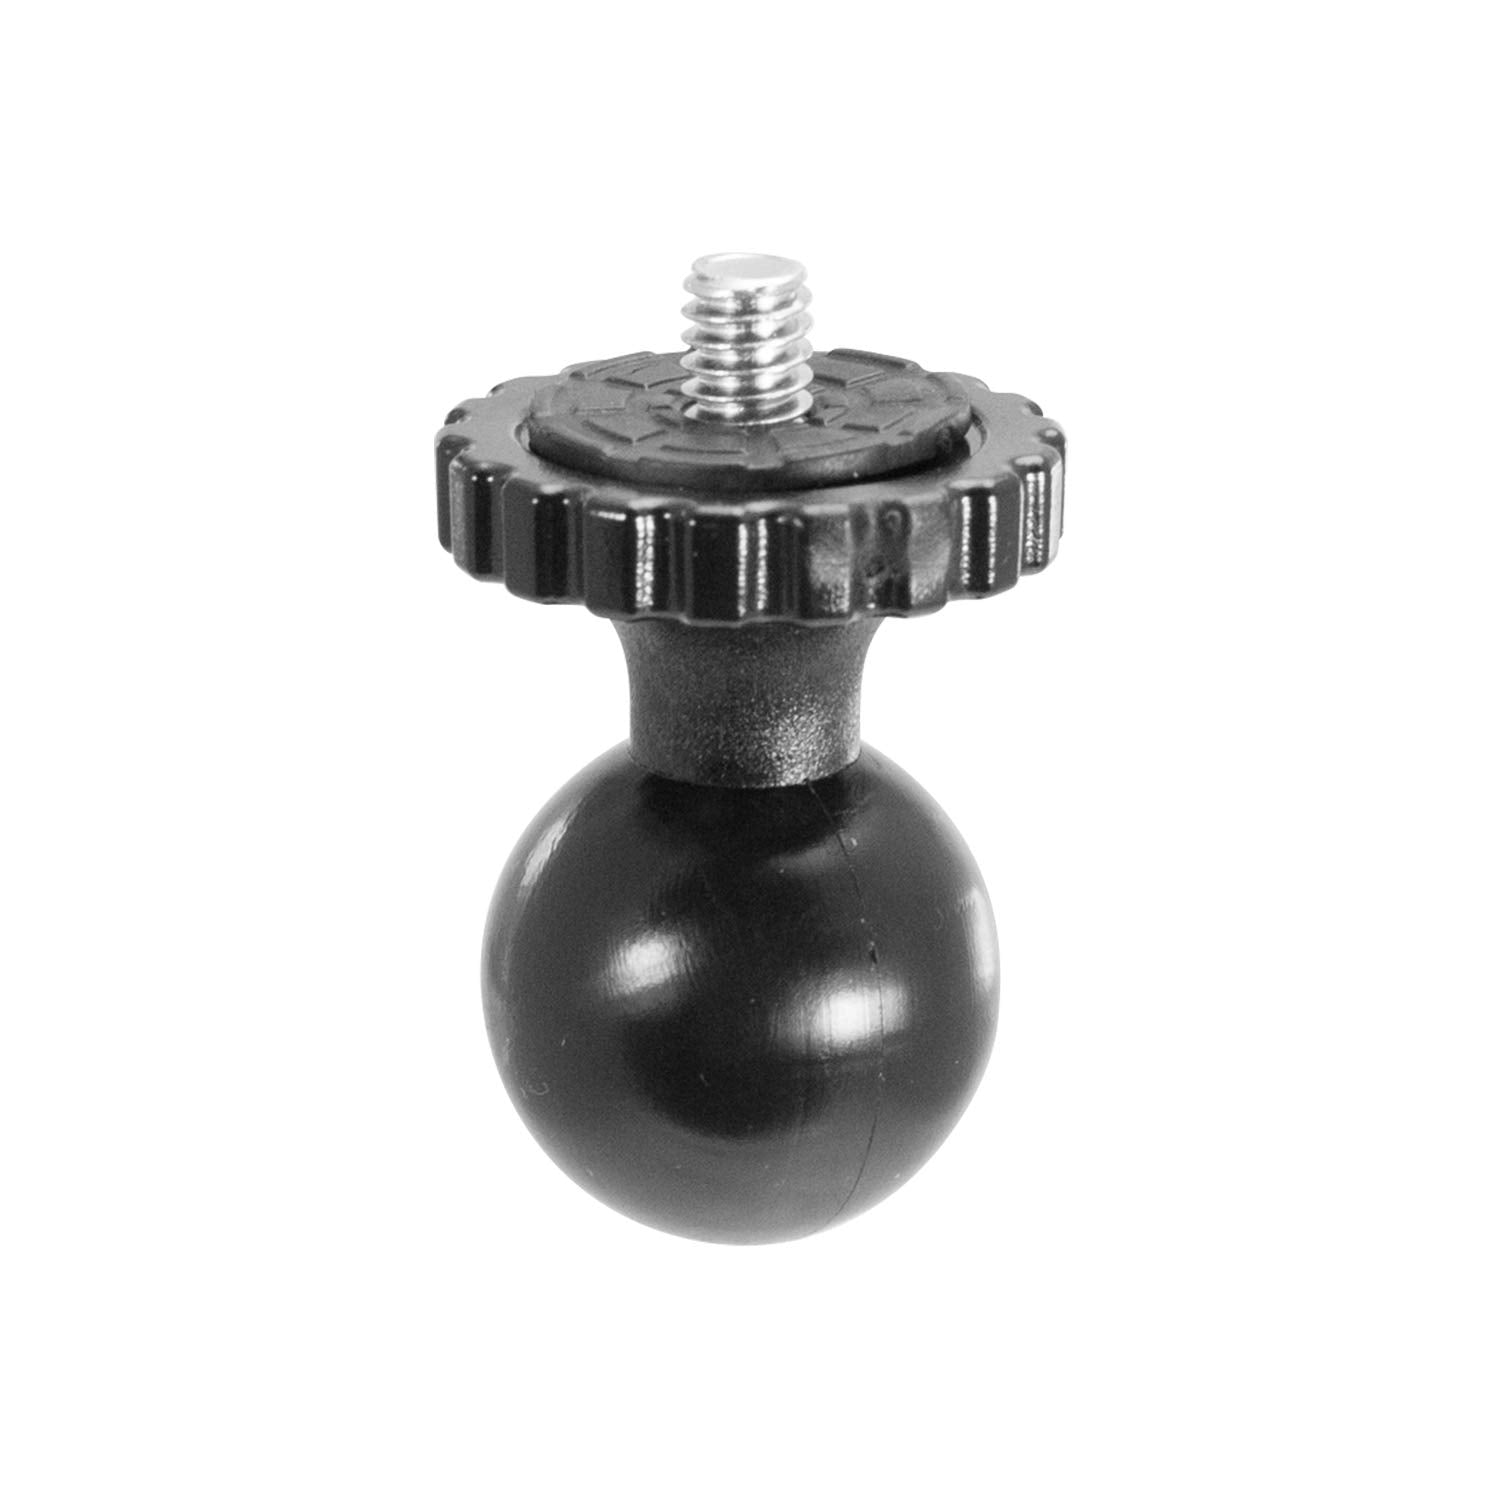 iBOLT™ 25mm/ 1 inch Ball to ¼ 20 Camera Screw Mount Adapter